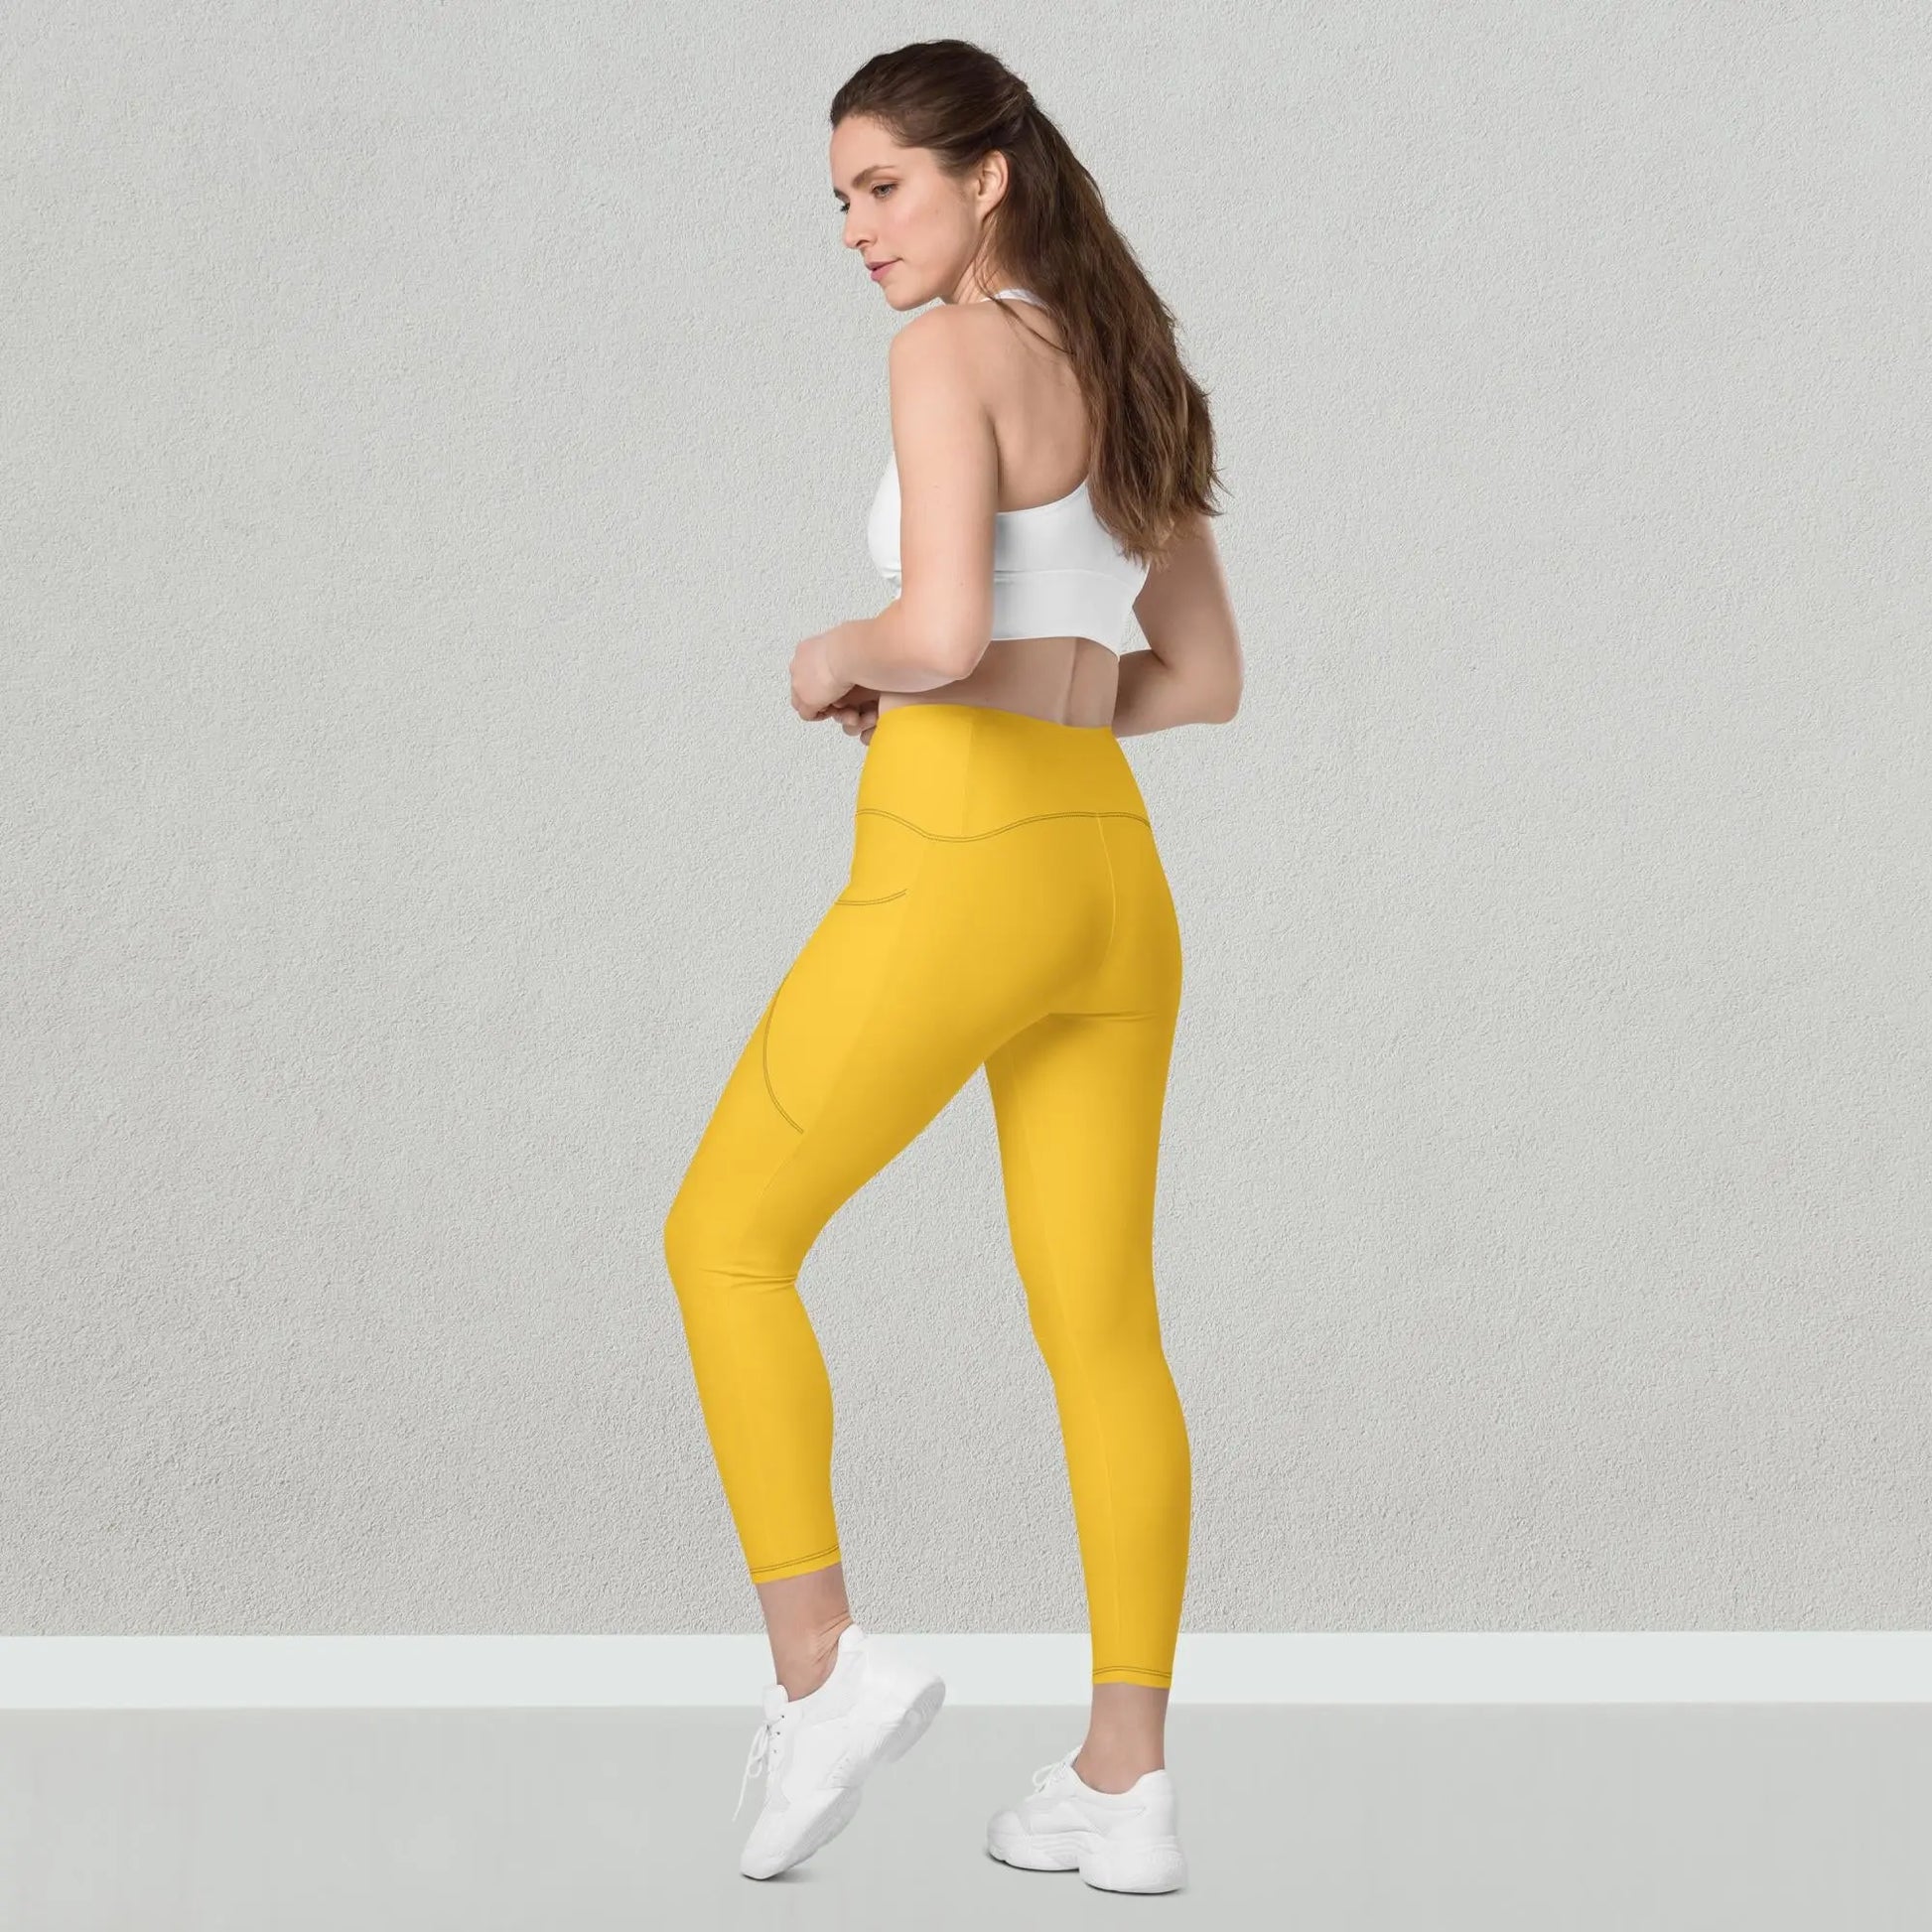 Yellow Leggings with pockets - Image #3